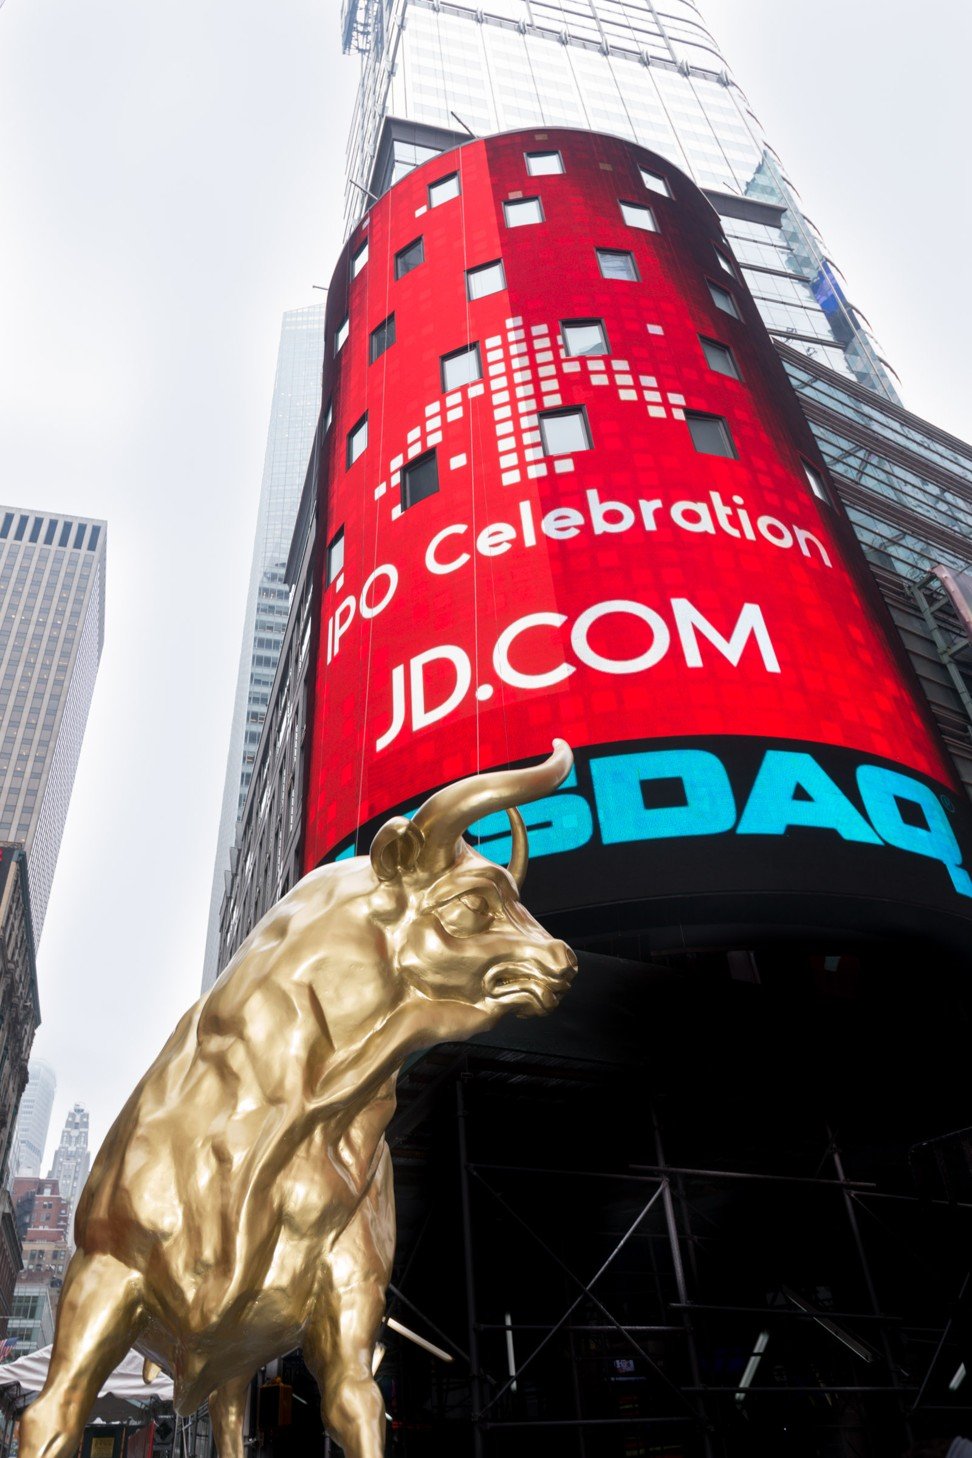 Video screens show logos for JD.com and Nasdaq above an aggressive bull figure in Times Square, New York, in 2014. File photo: Nasdaq OMX